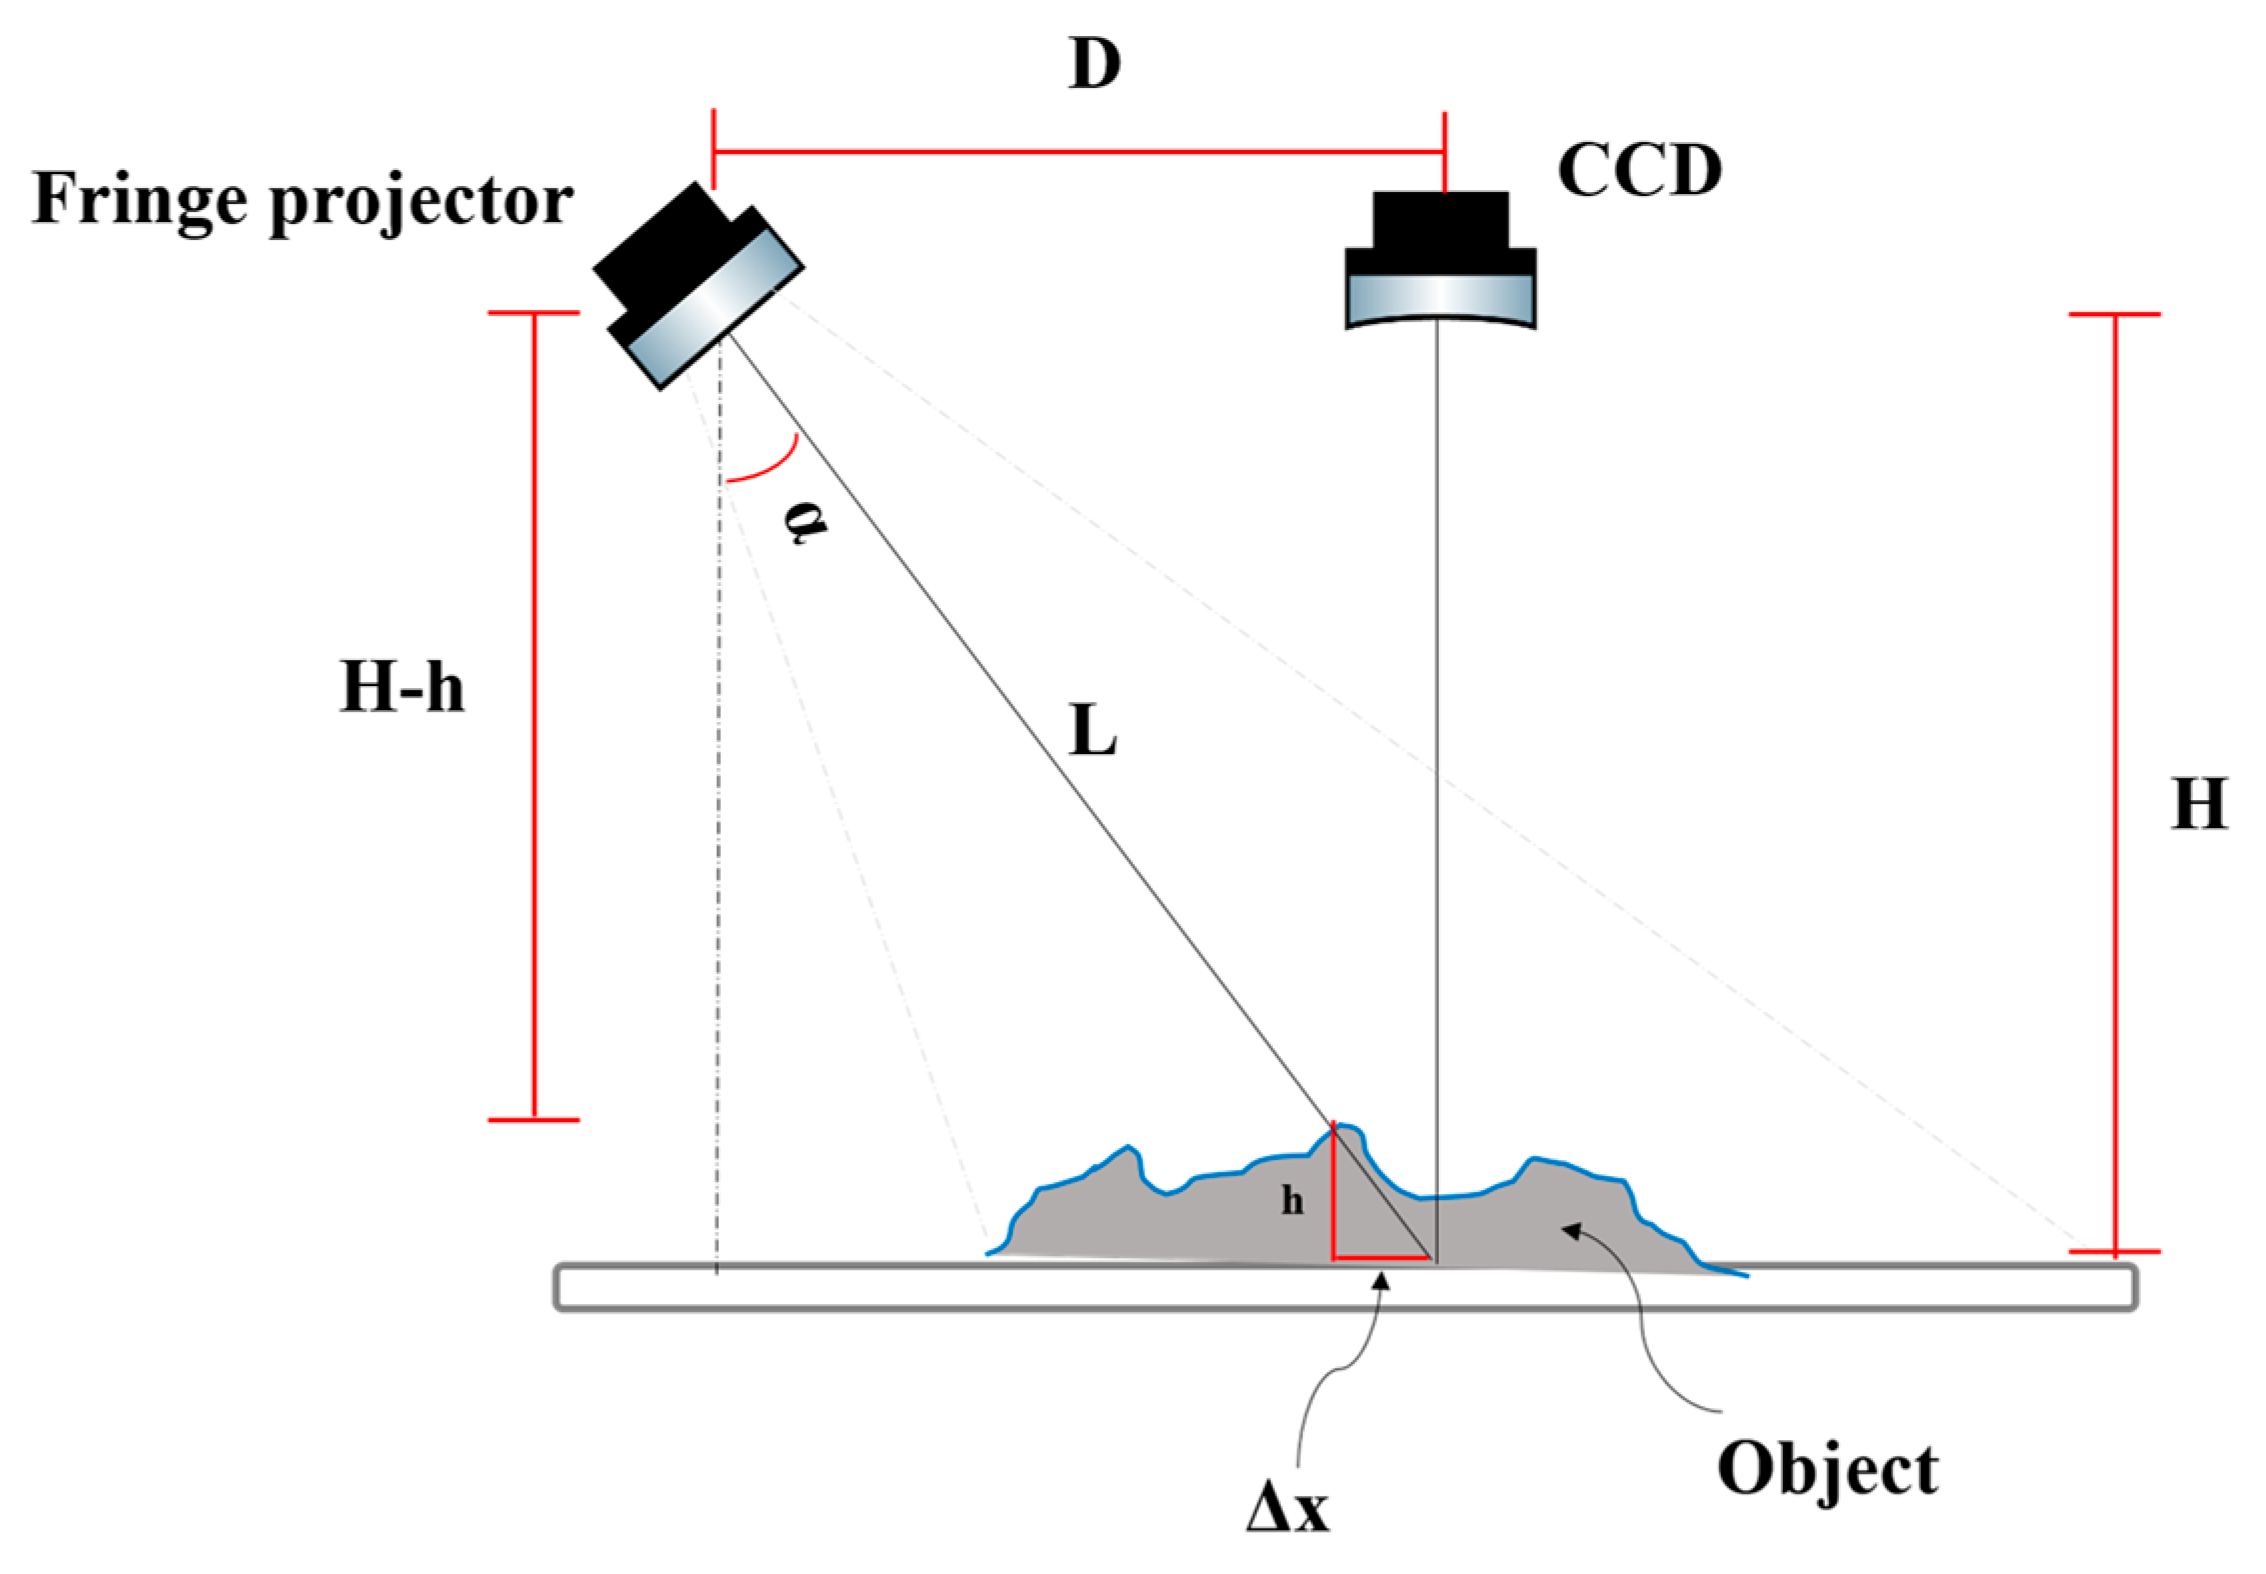 PDF) A comparison of reverse projection and laser scanning